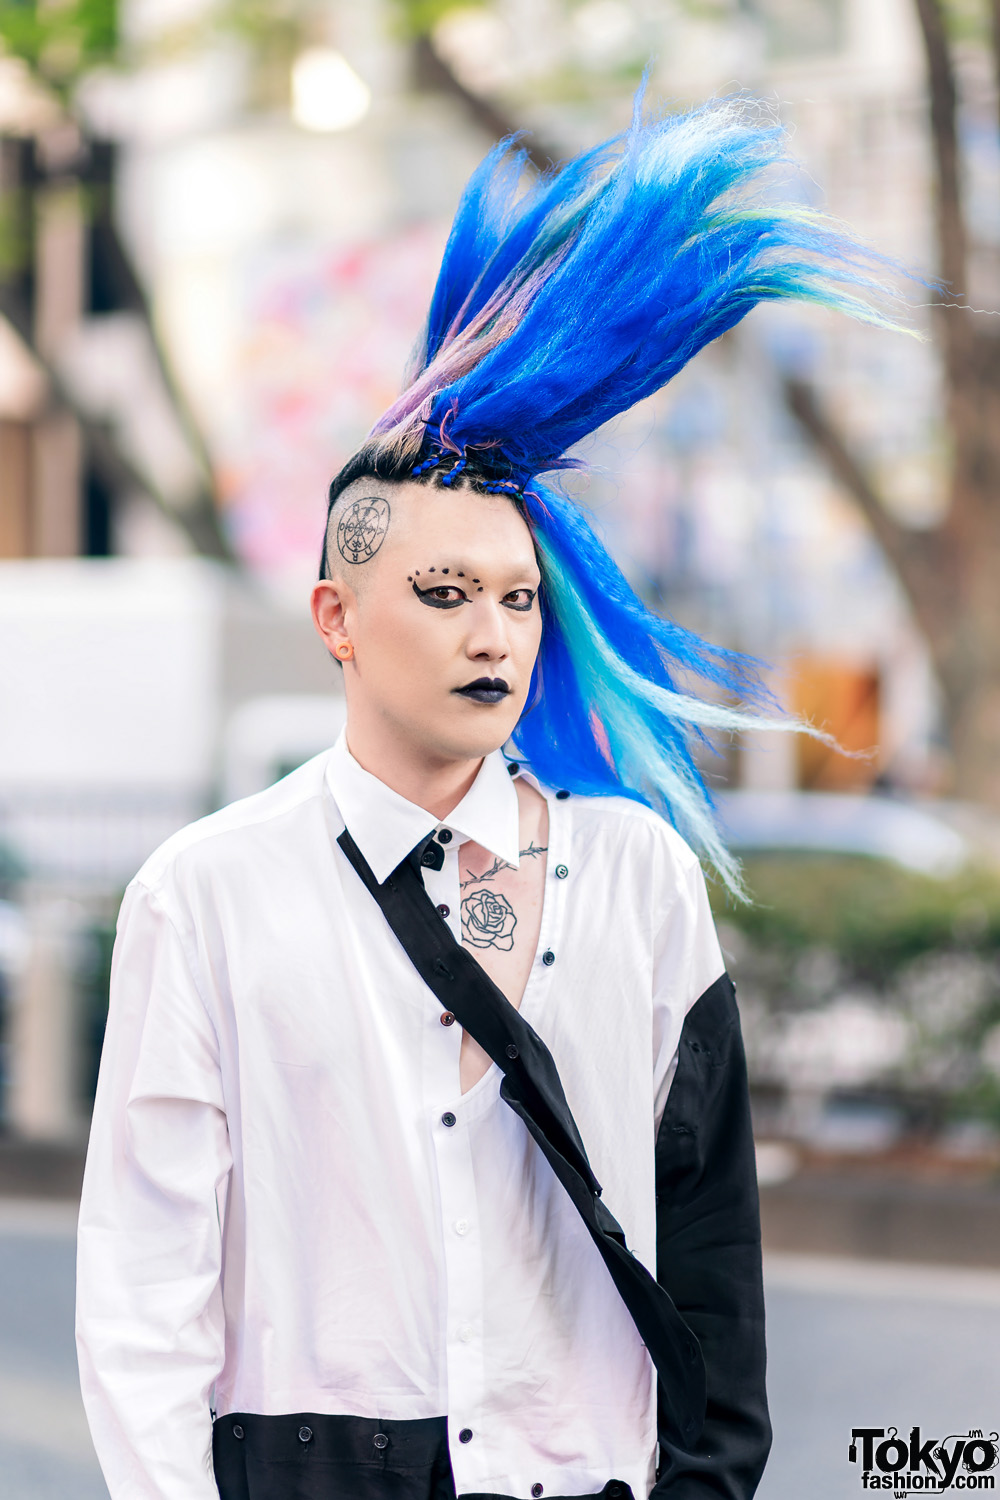 Vintage Fashion Buyer & Model in Harajuku w/ Tall Blue Hairstyle ...